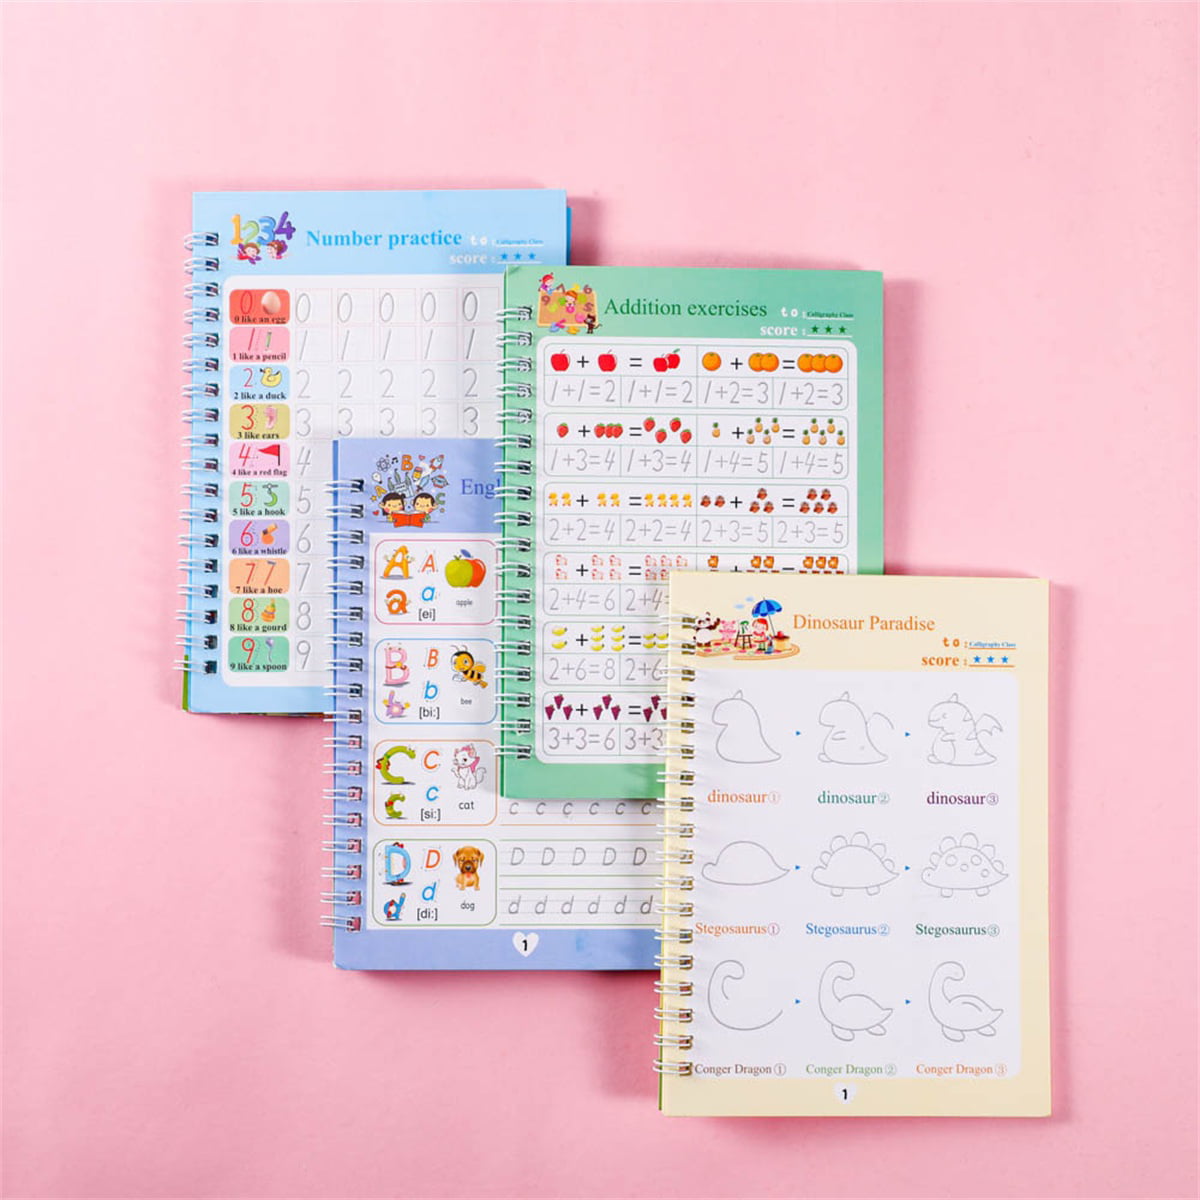 Magic Practice Copybook,Magic Calligraphy That Can Be Reused Handwriting Copybook Set for Kids,Improve Kids Calligraphy Letter Writing 